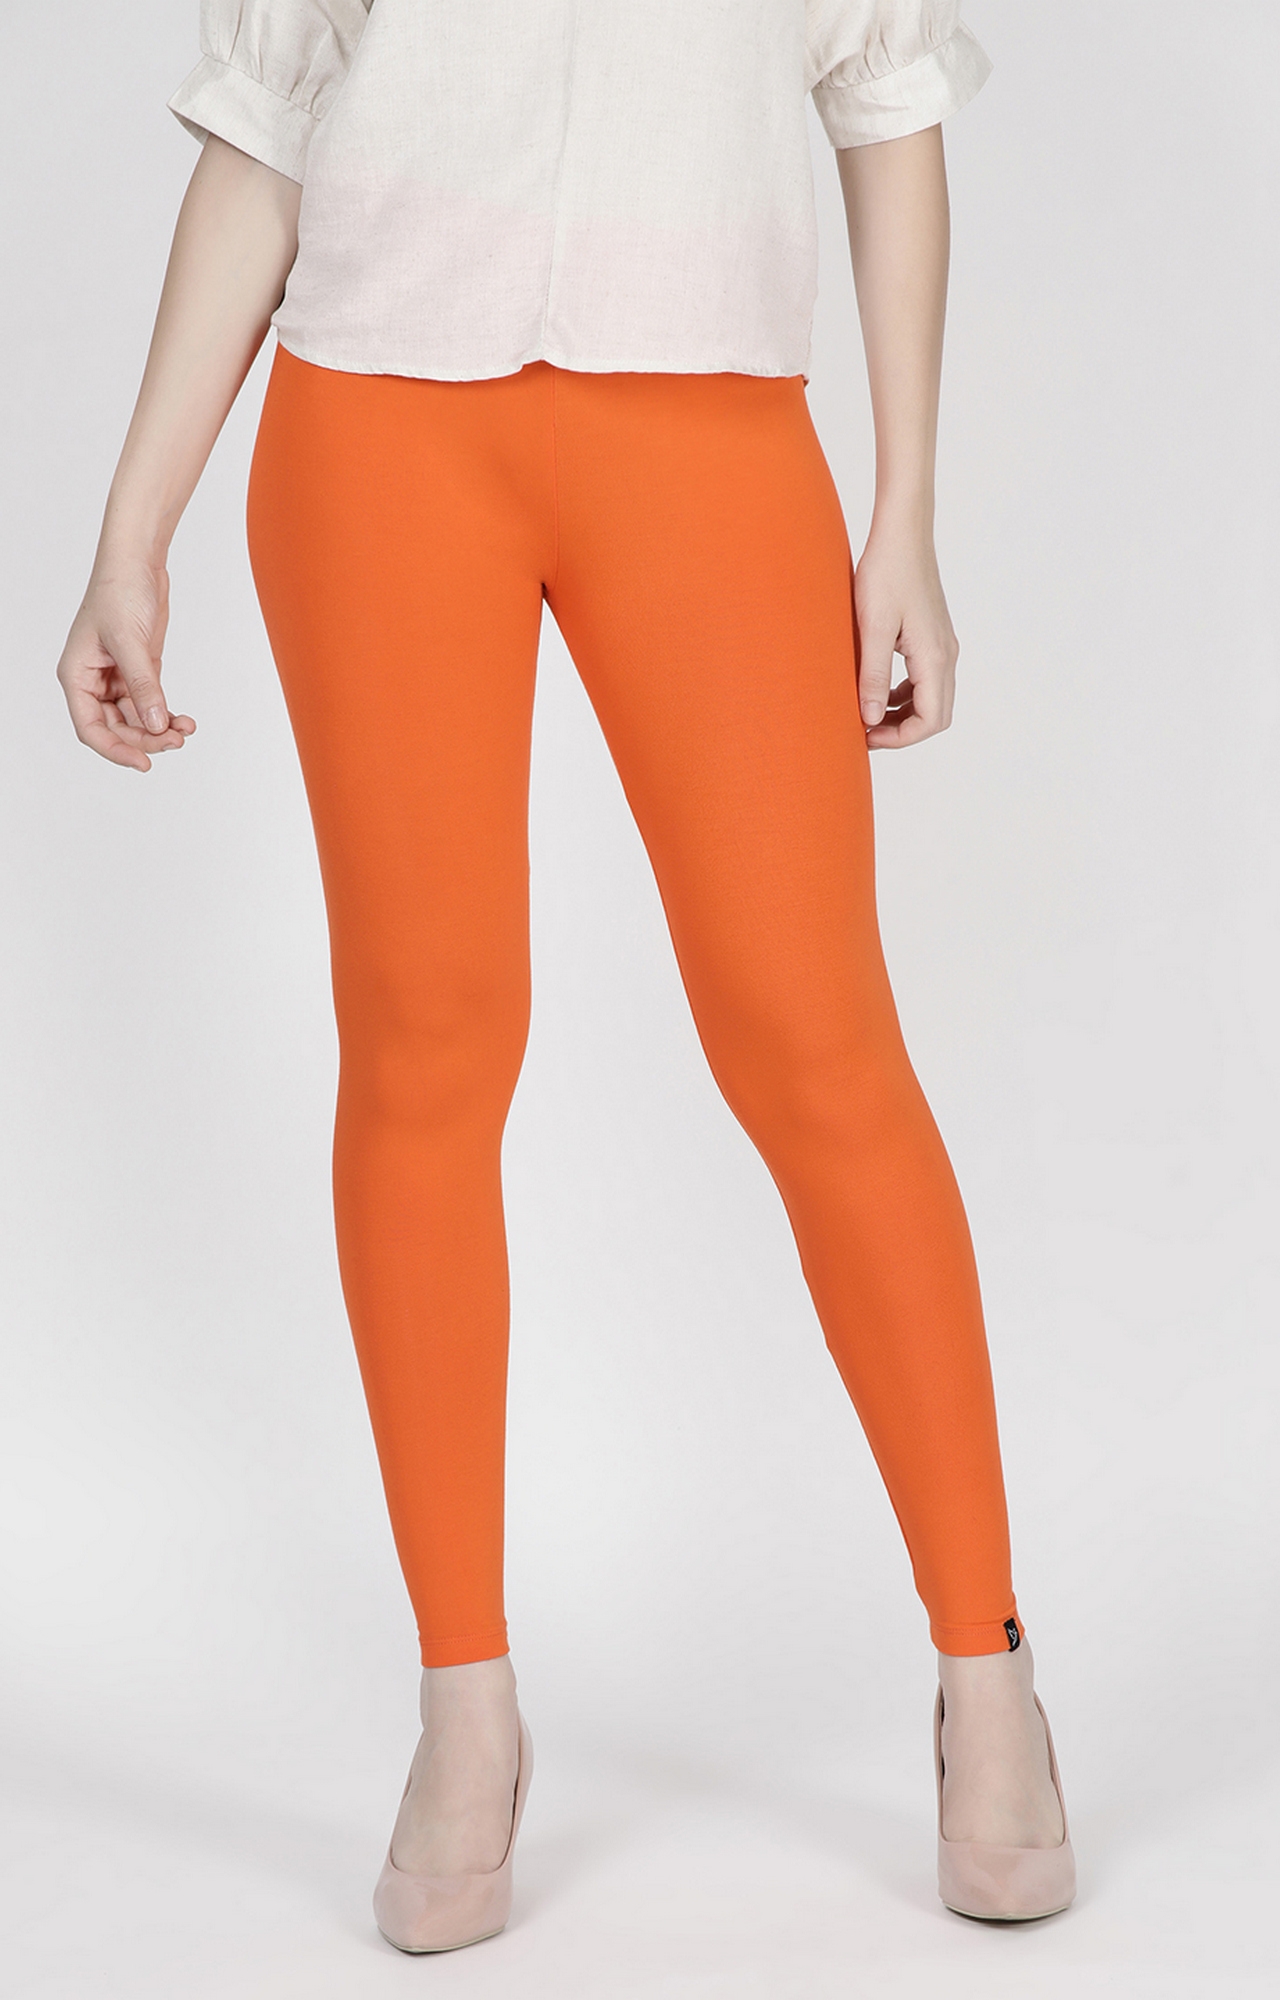 Twin Birds Online - Add the all new ankle length long and lean fit leggings  that are tapered in the bottom to give a stylish look. #leggings #anklefit  #blueleggings #twinbirdsleggings #bestquality #cottonleggings #